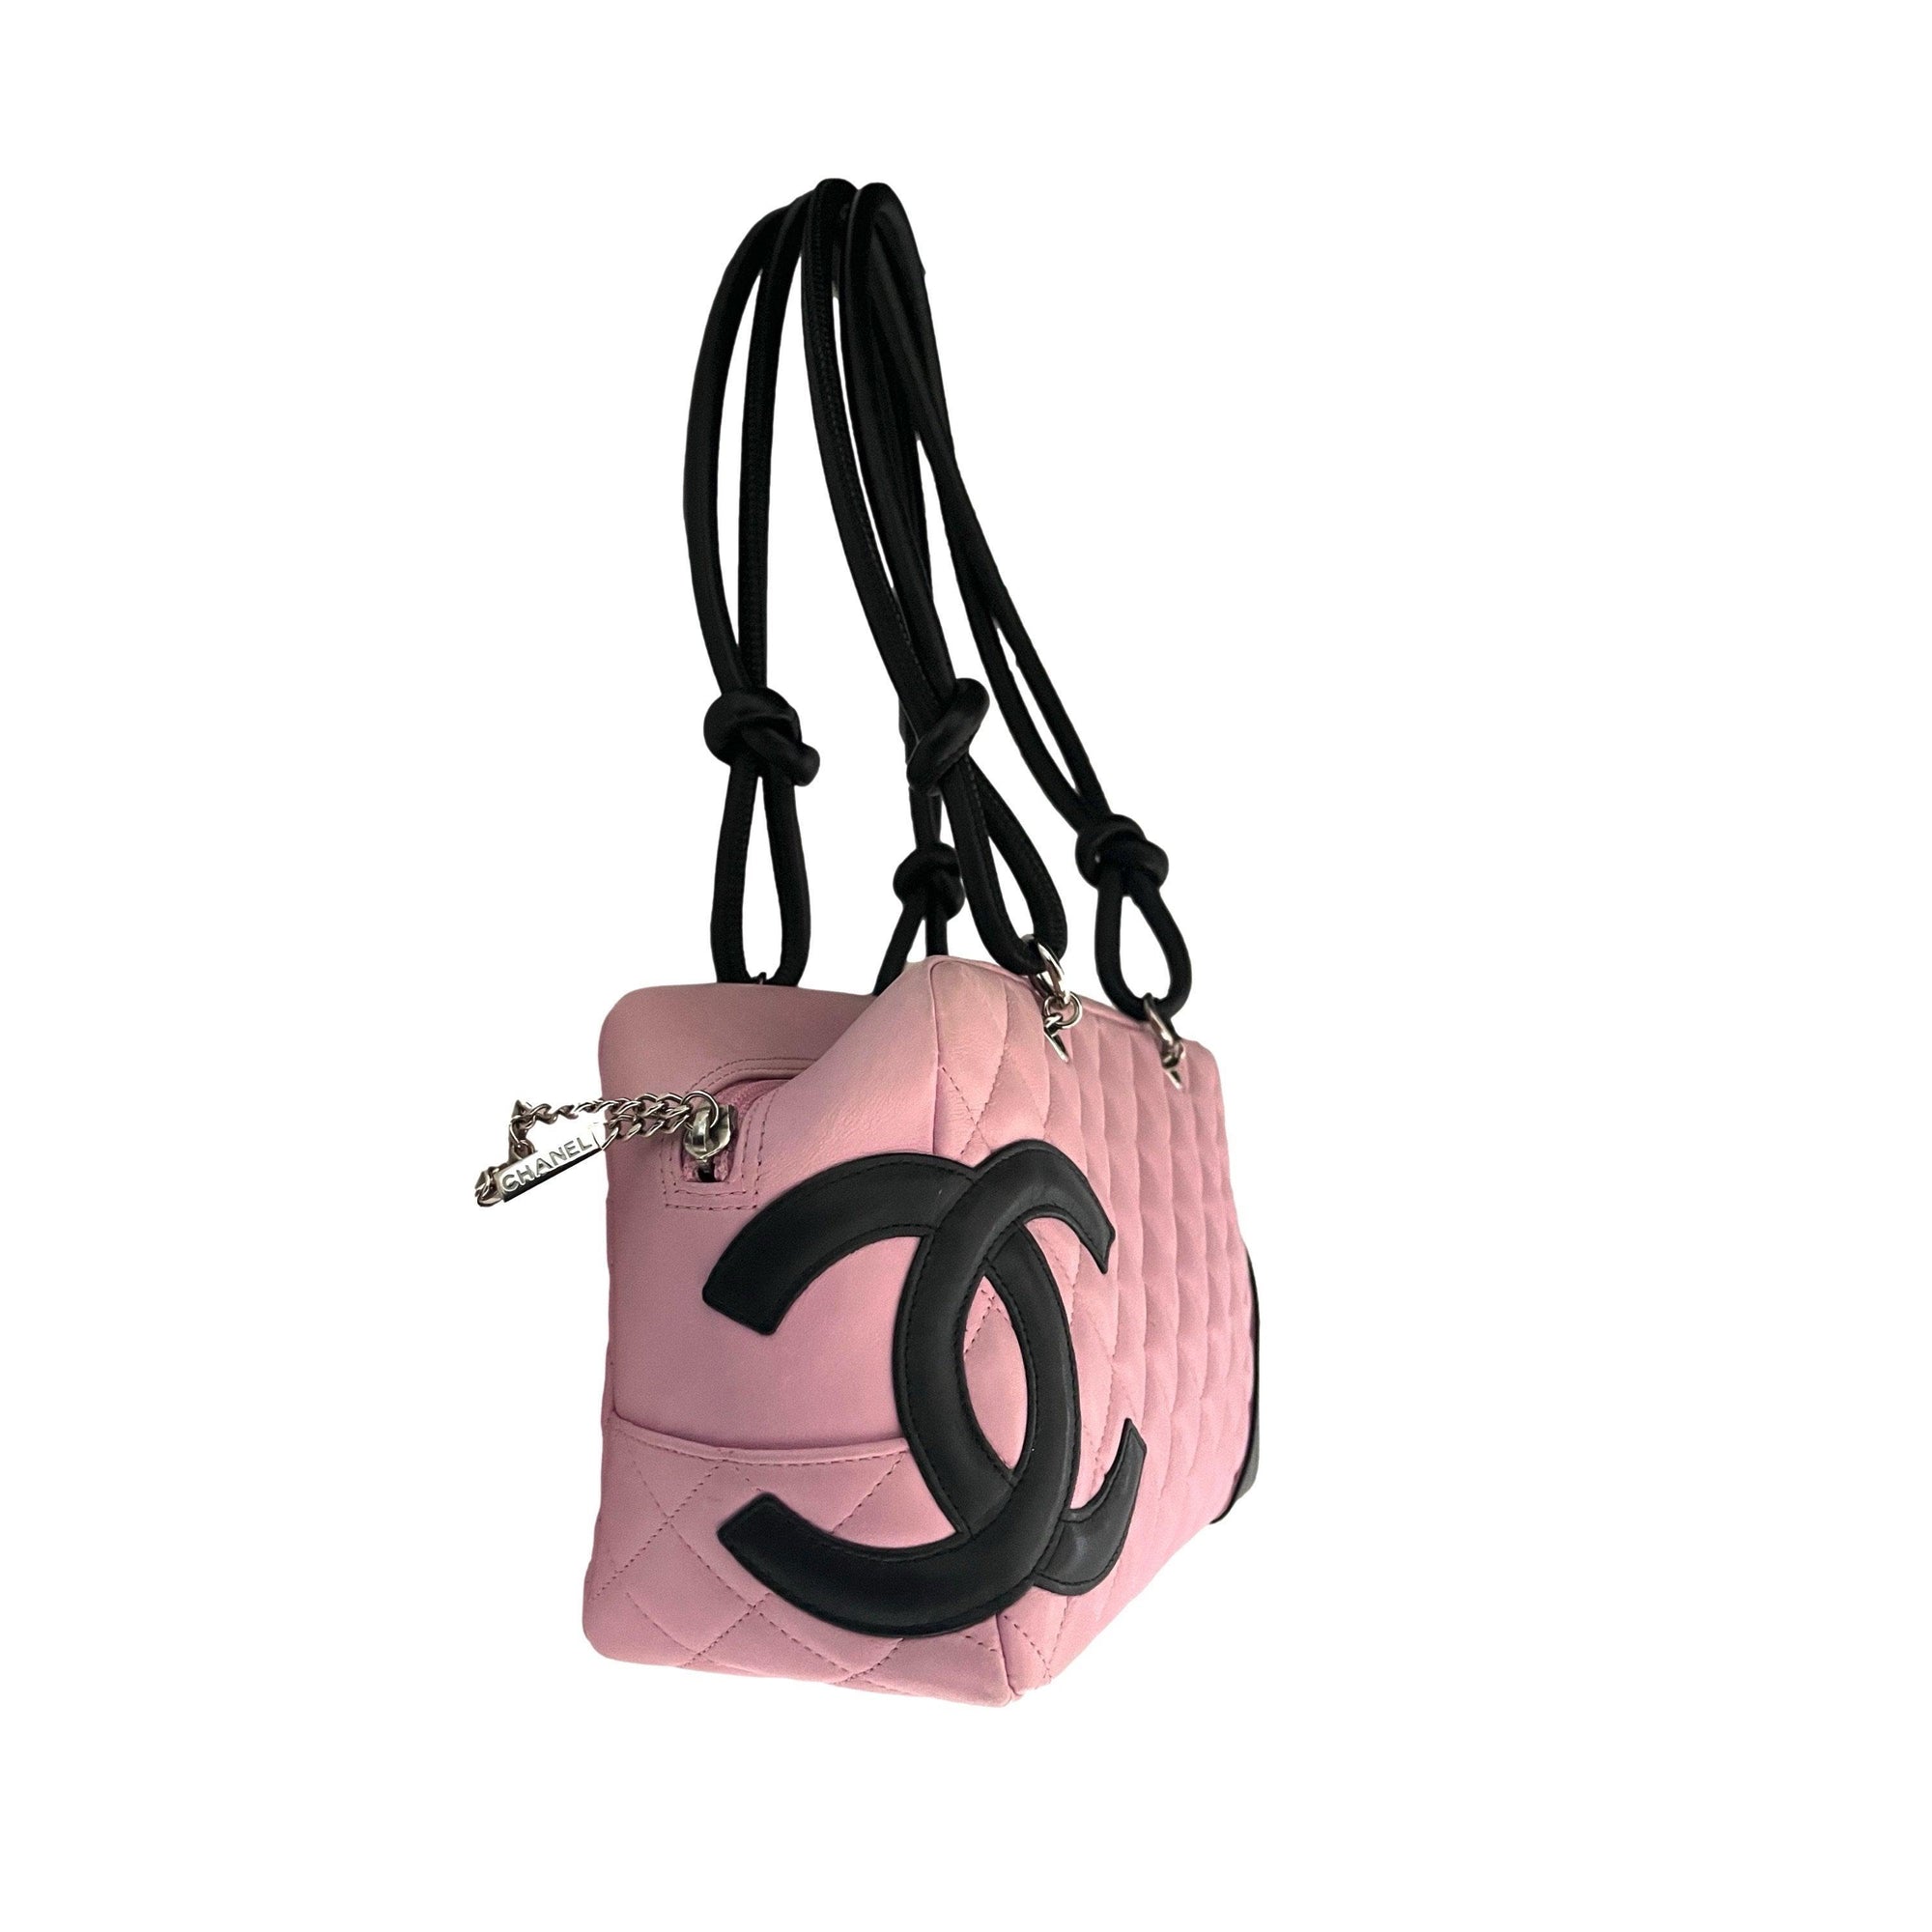 Chanel Pink Cambon Quilted Shoulder Bag